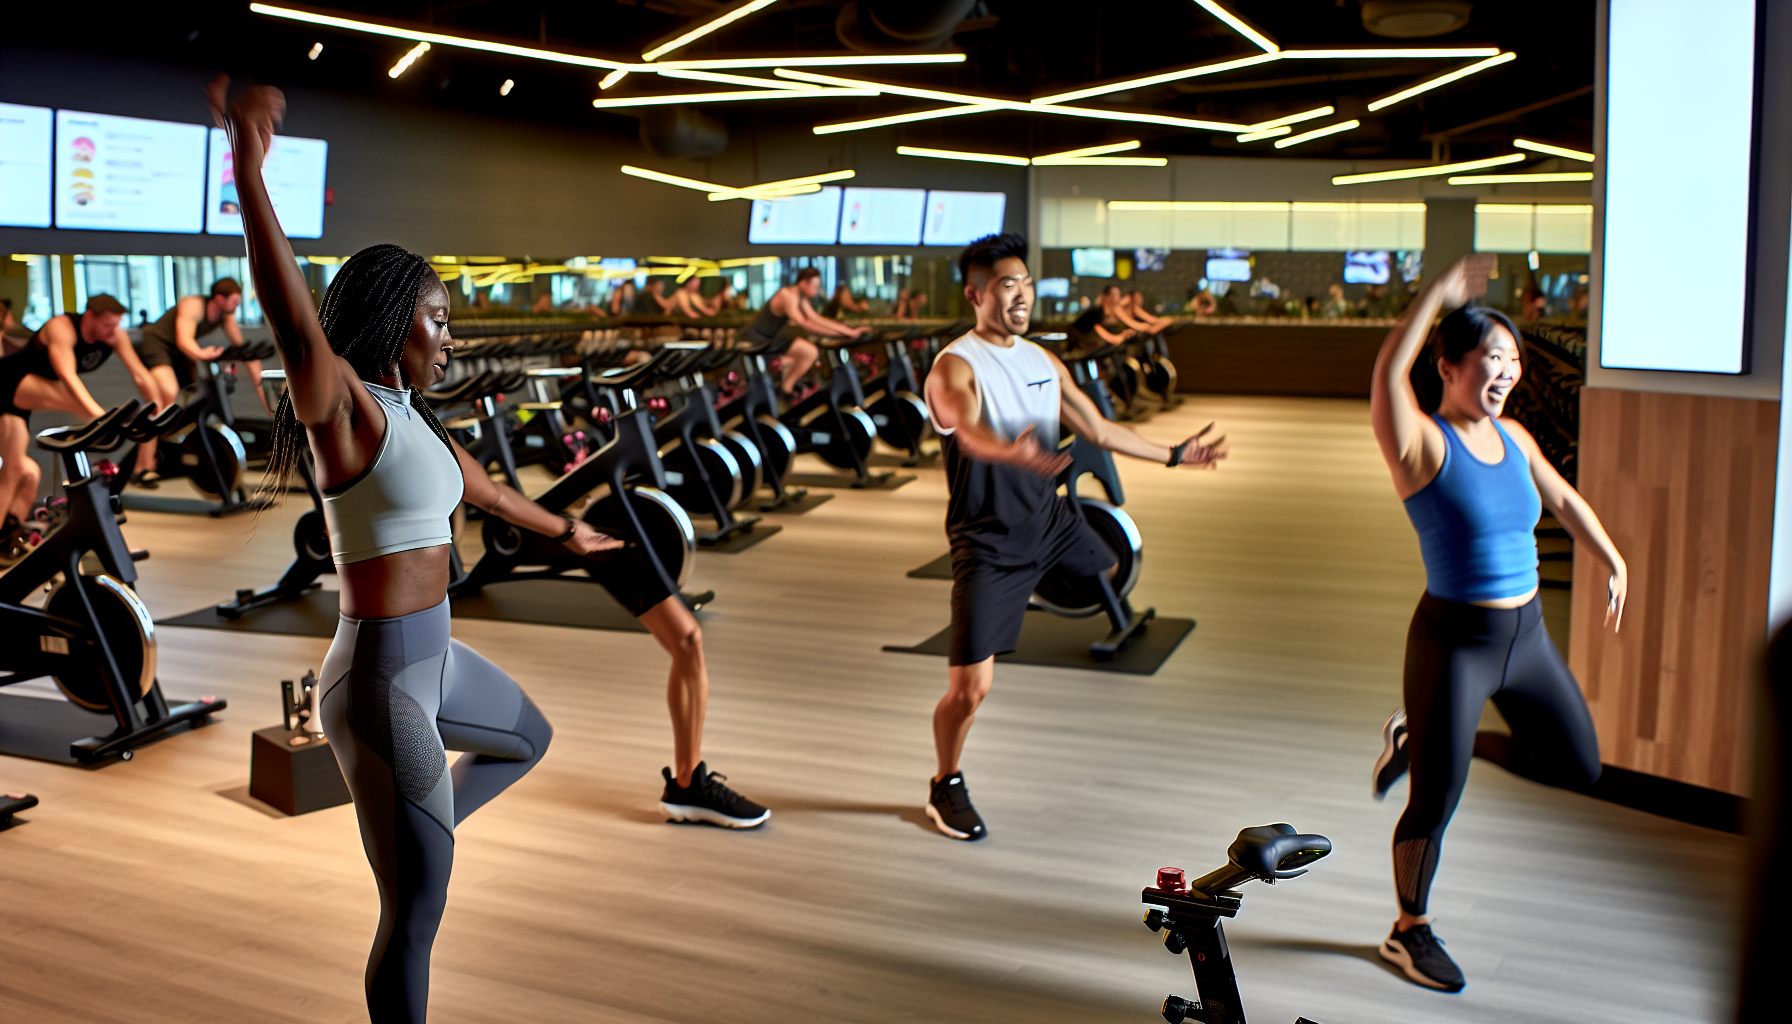 Diverse fitness classes including yoga, spin, and HIIT at top Vancouver gyms